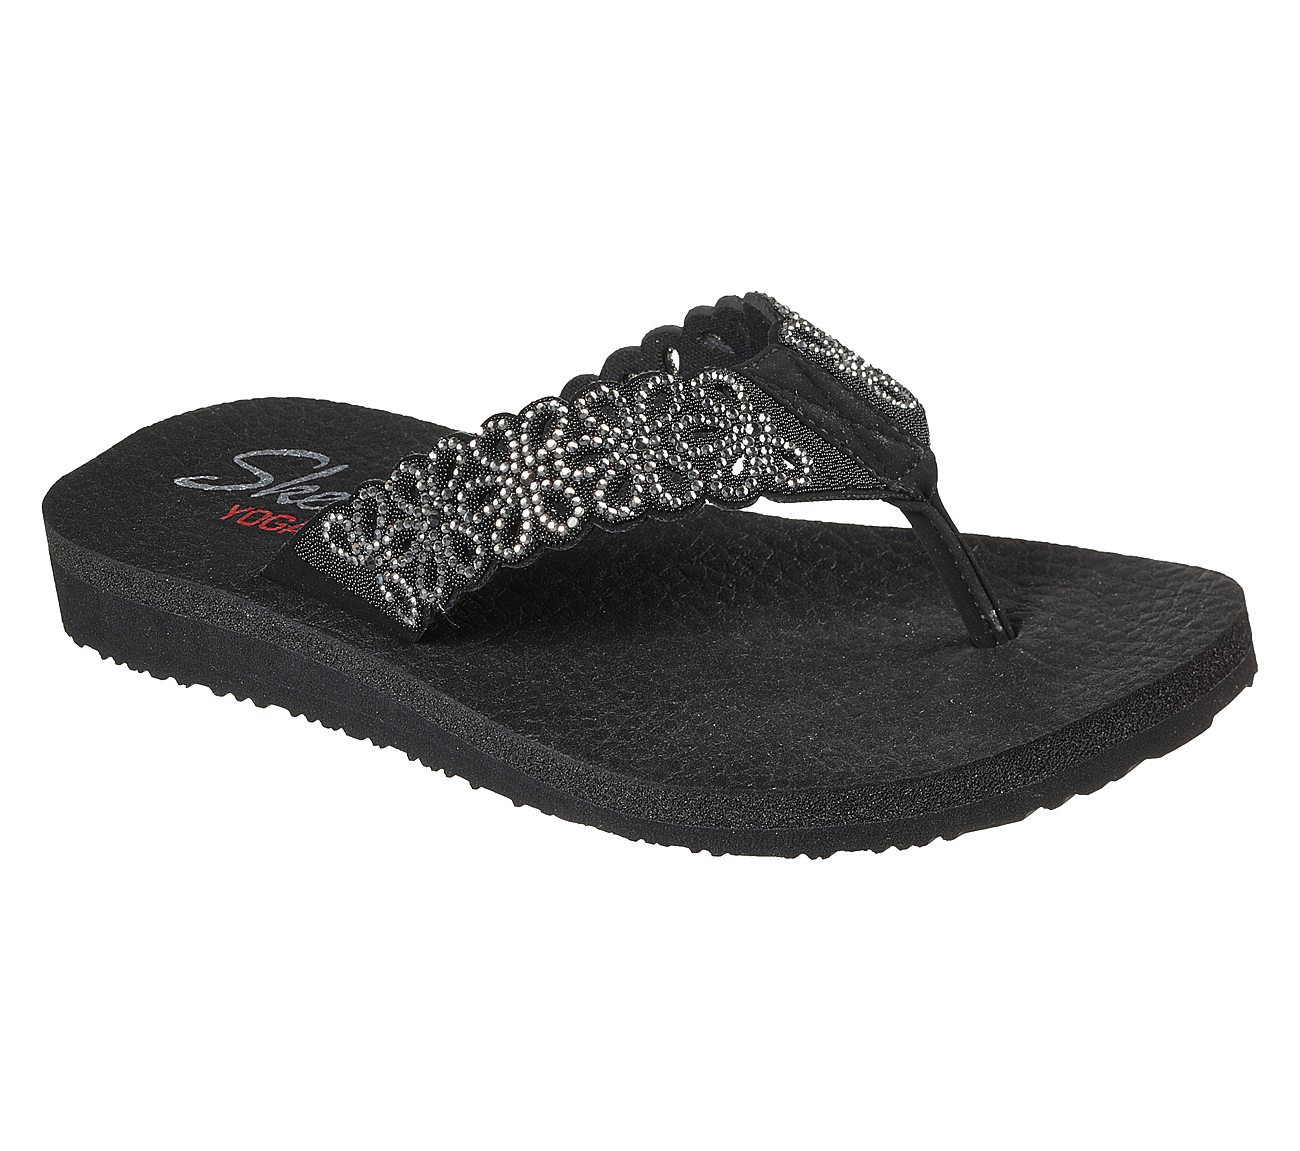 MEDITATION - SIMPLE FLORAL, BLACK/SILVER Footwear Lateral View